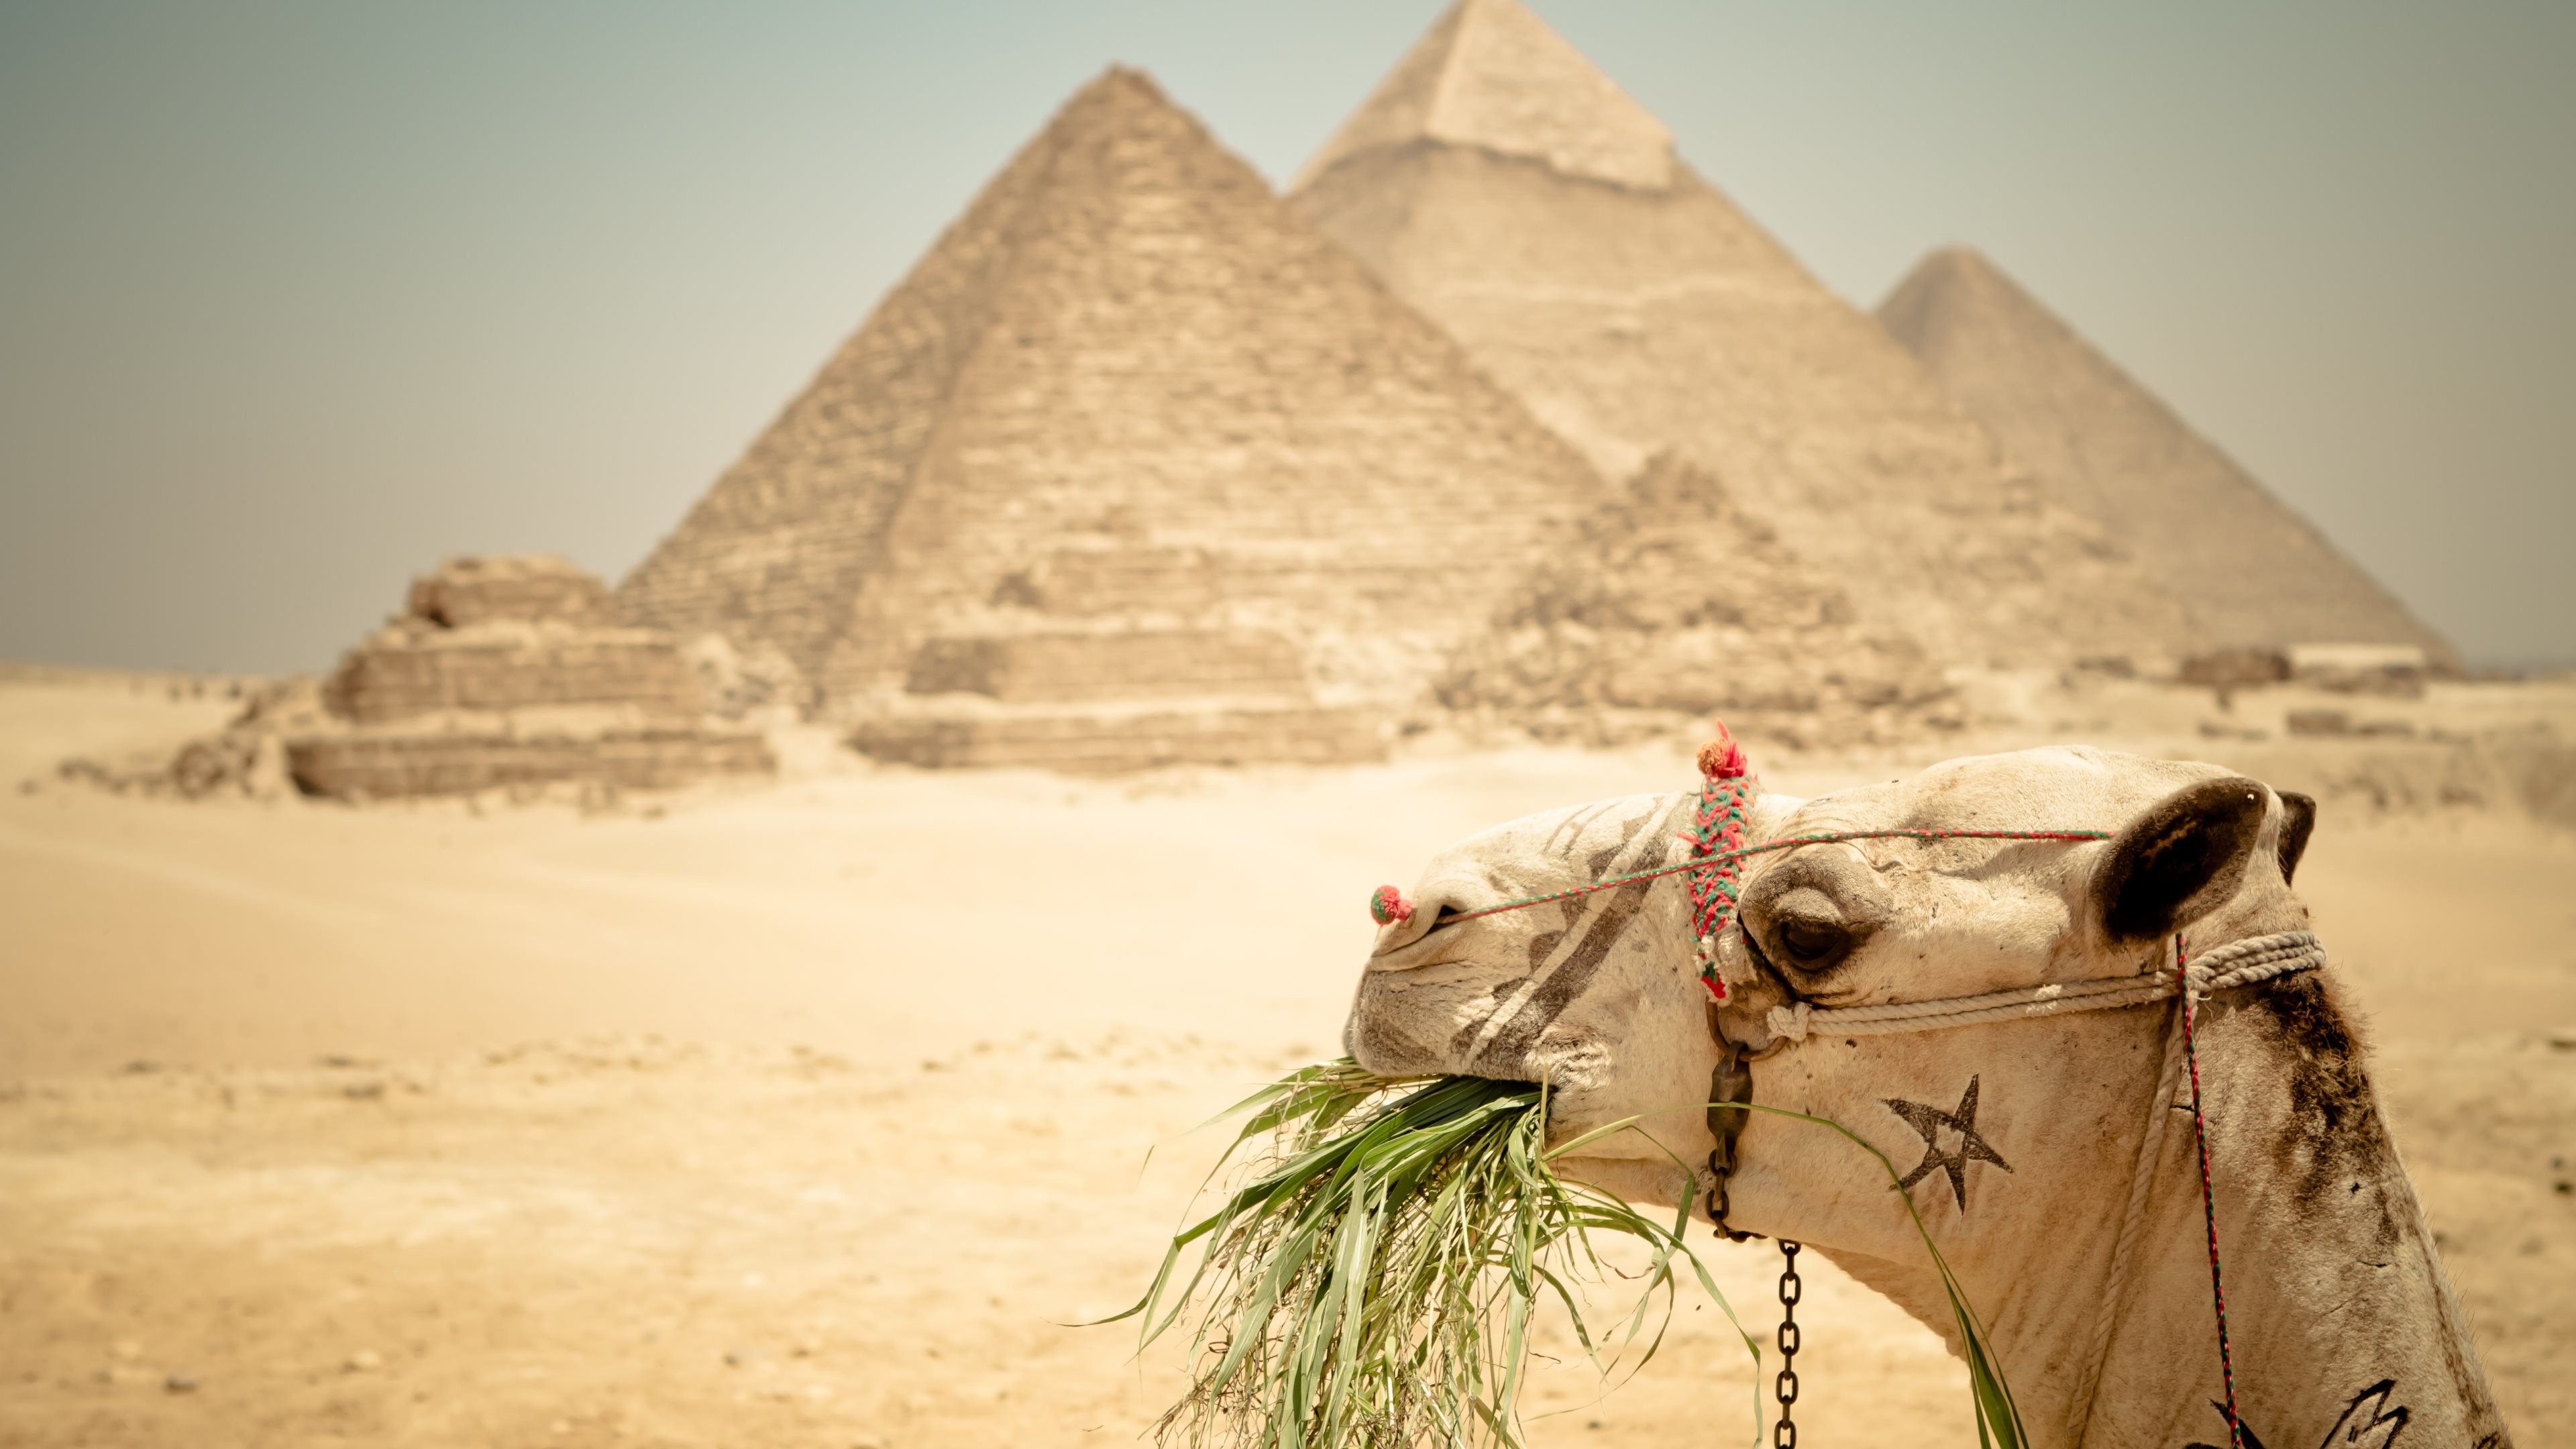 3840x2160 A camel and Egypt pyramid in the 3rd wallpaper